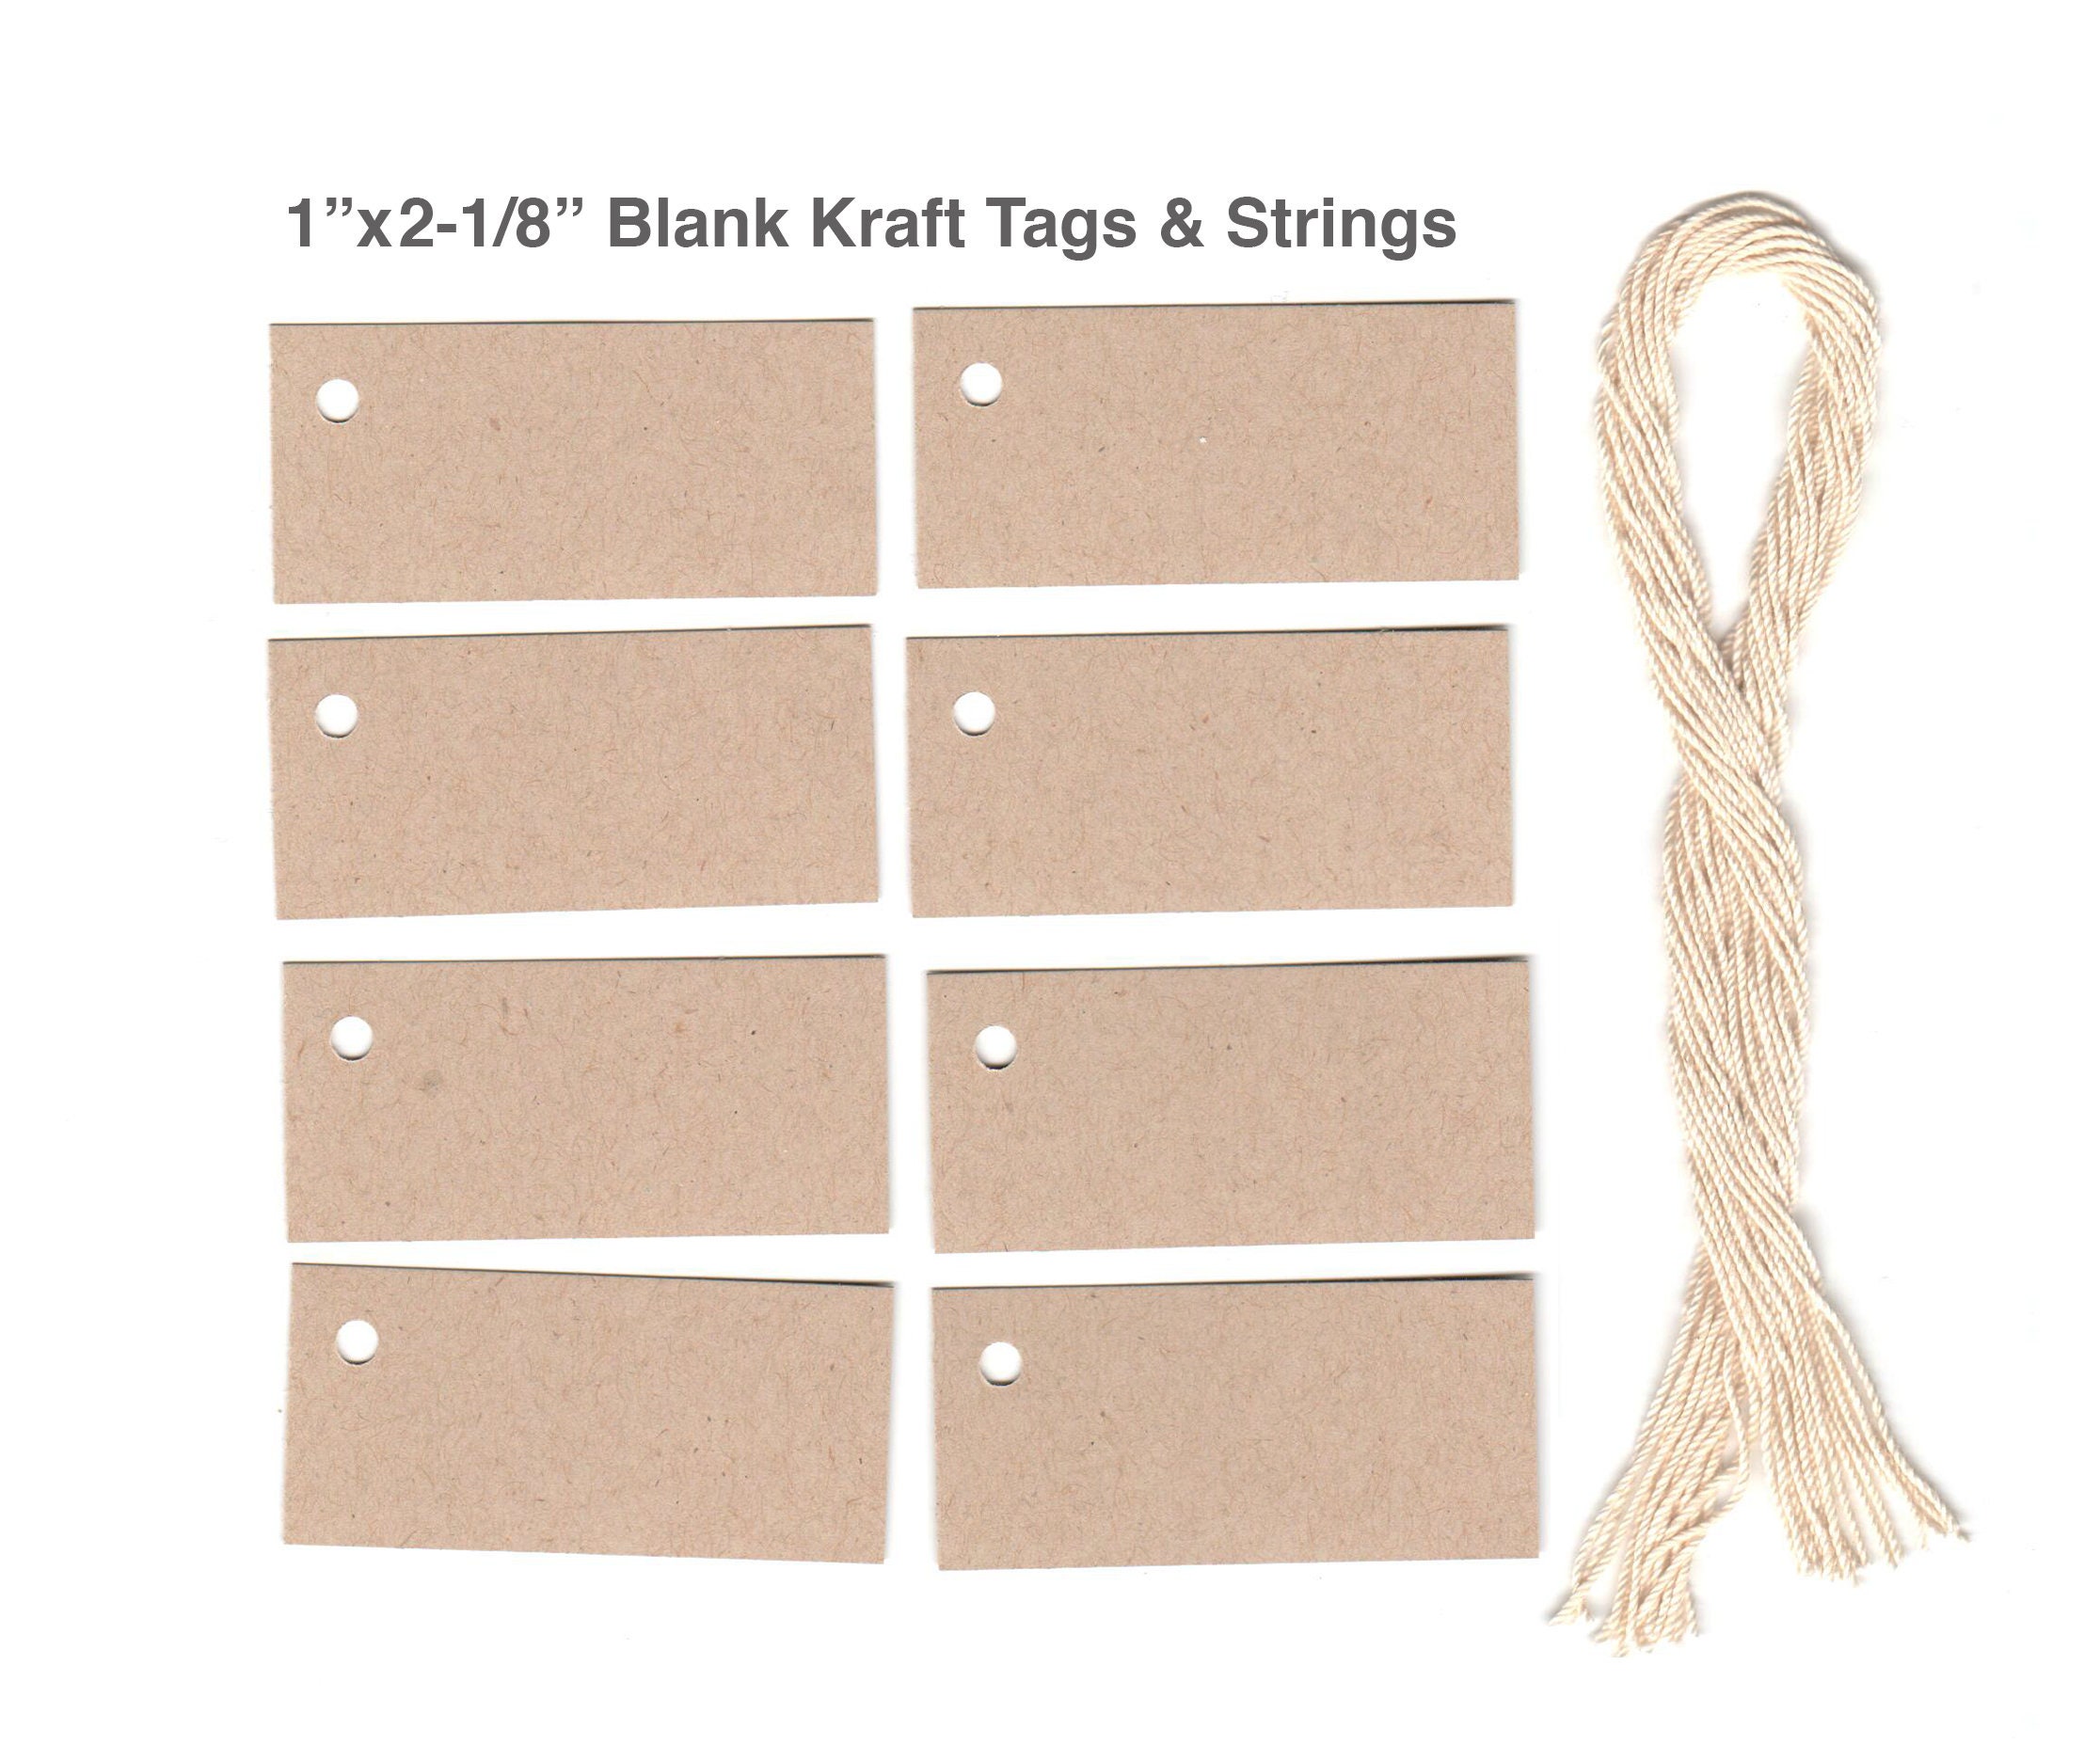 Large Perforated White Tag- String